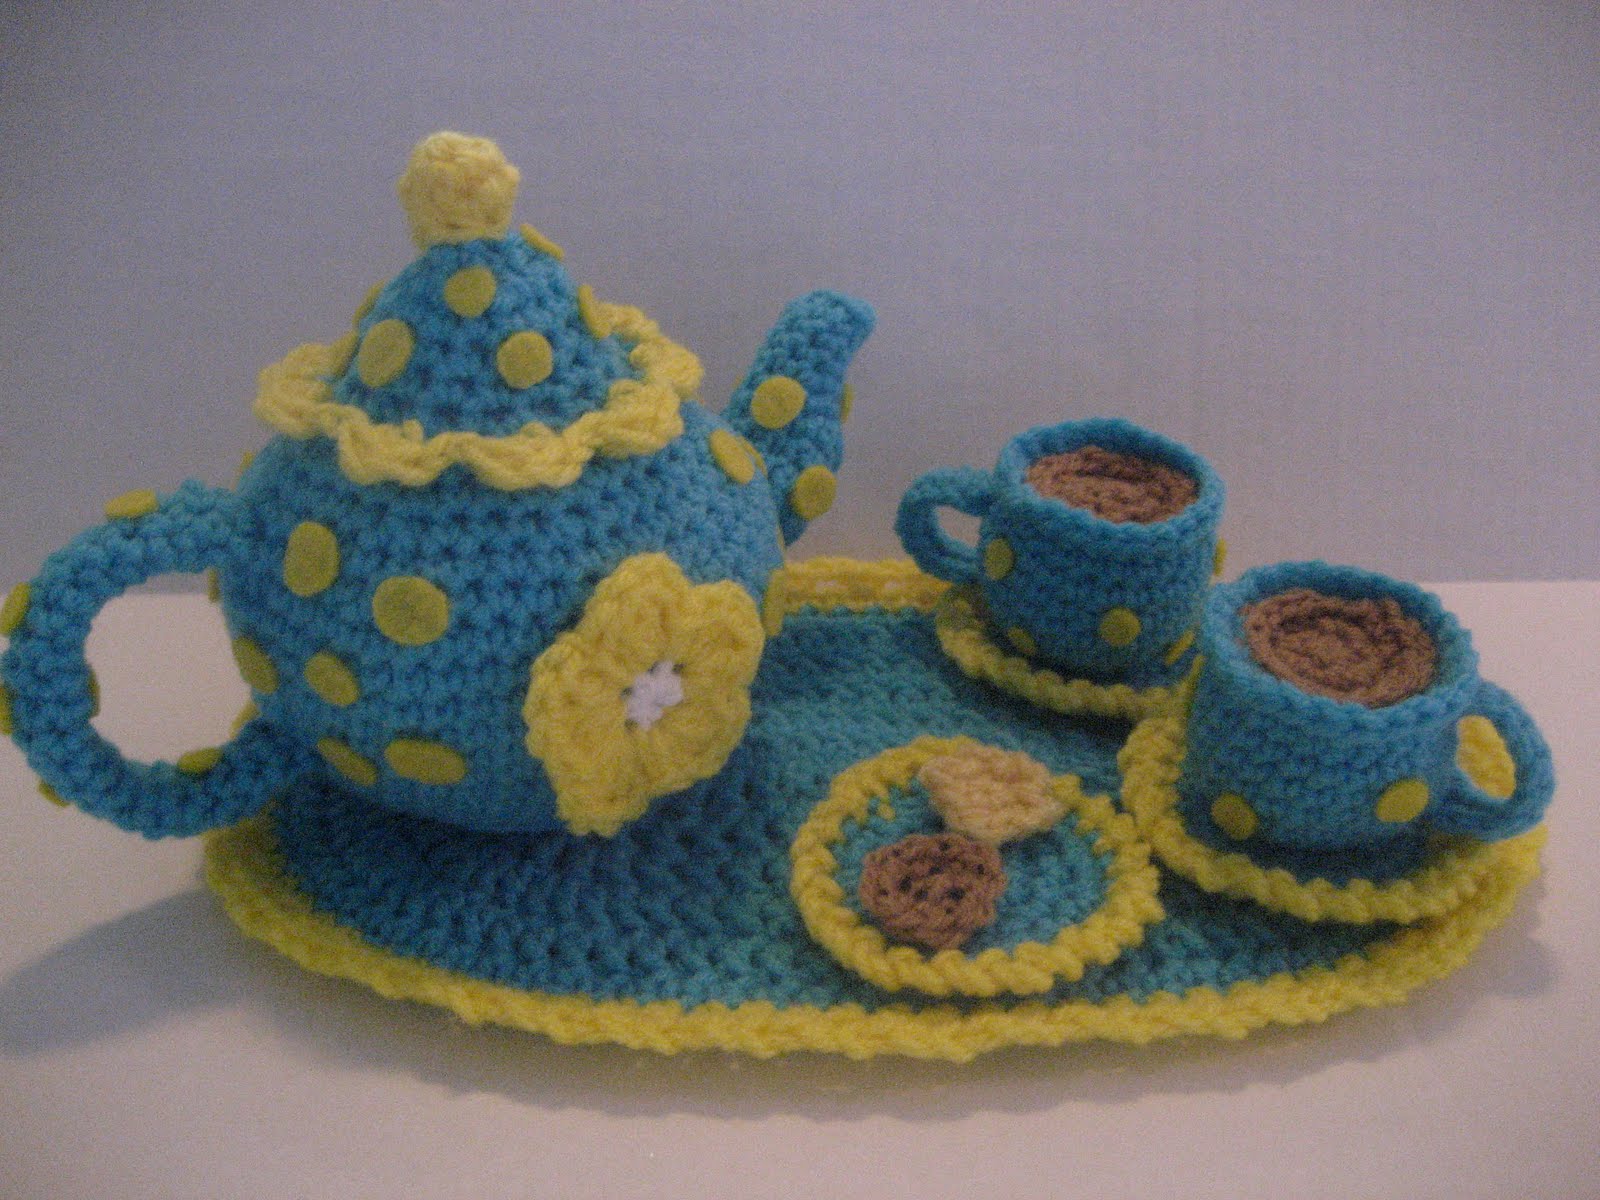 Quilted Mad Tea Party Set - Instructables - Make, How To, and DIY